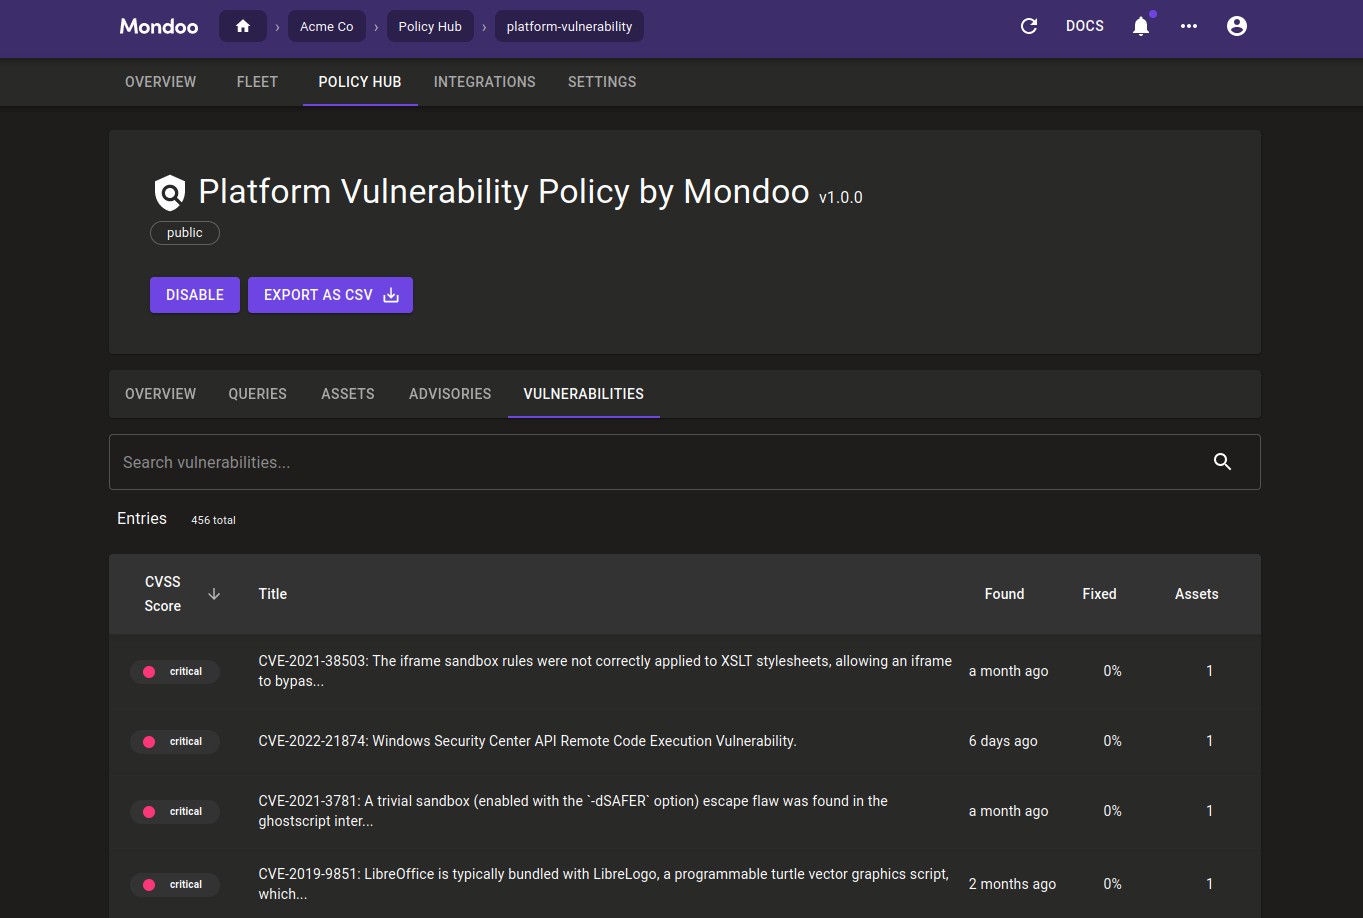 Advisories and Vulnerabilities tabs in the Policy Hub of the Mondoo Platform